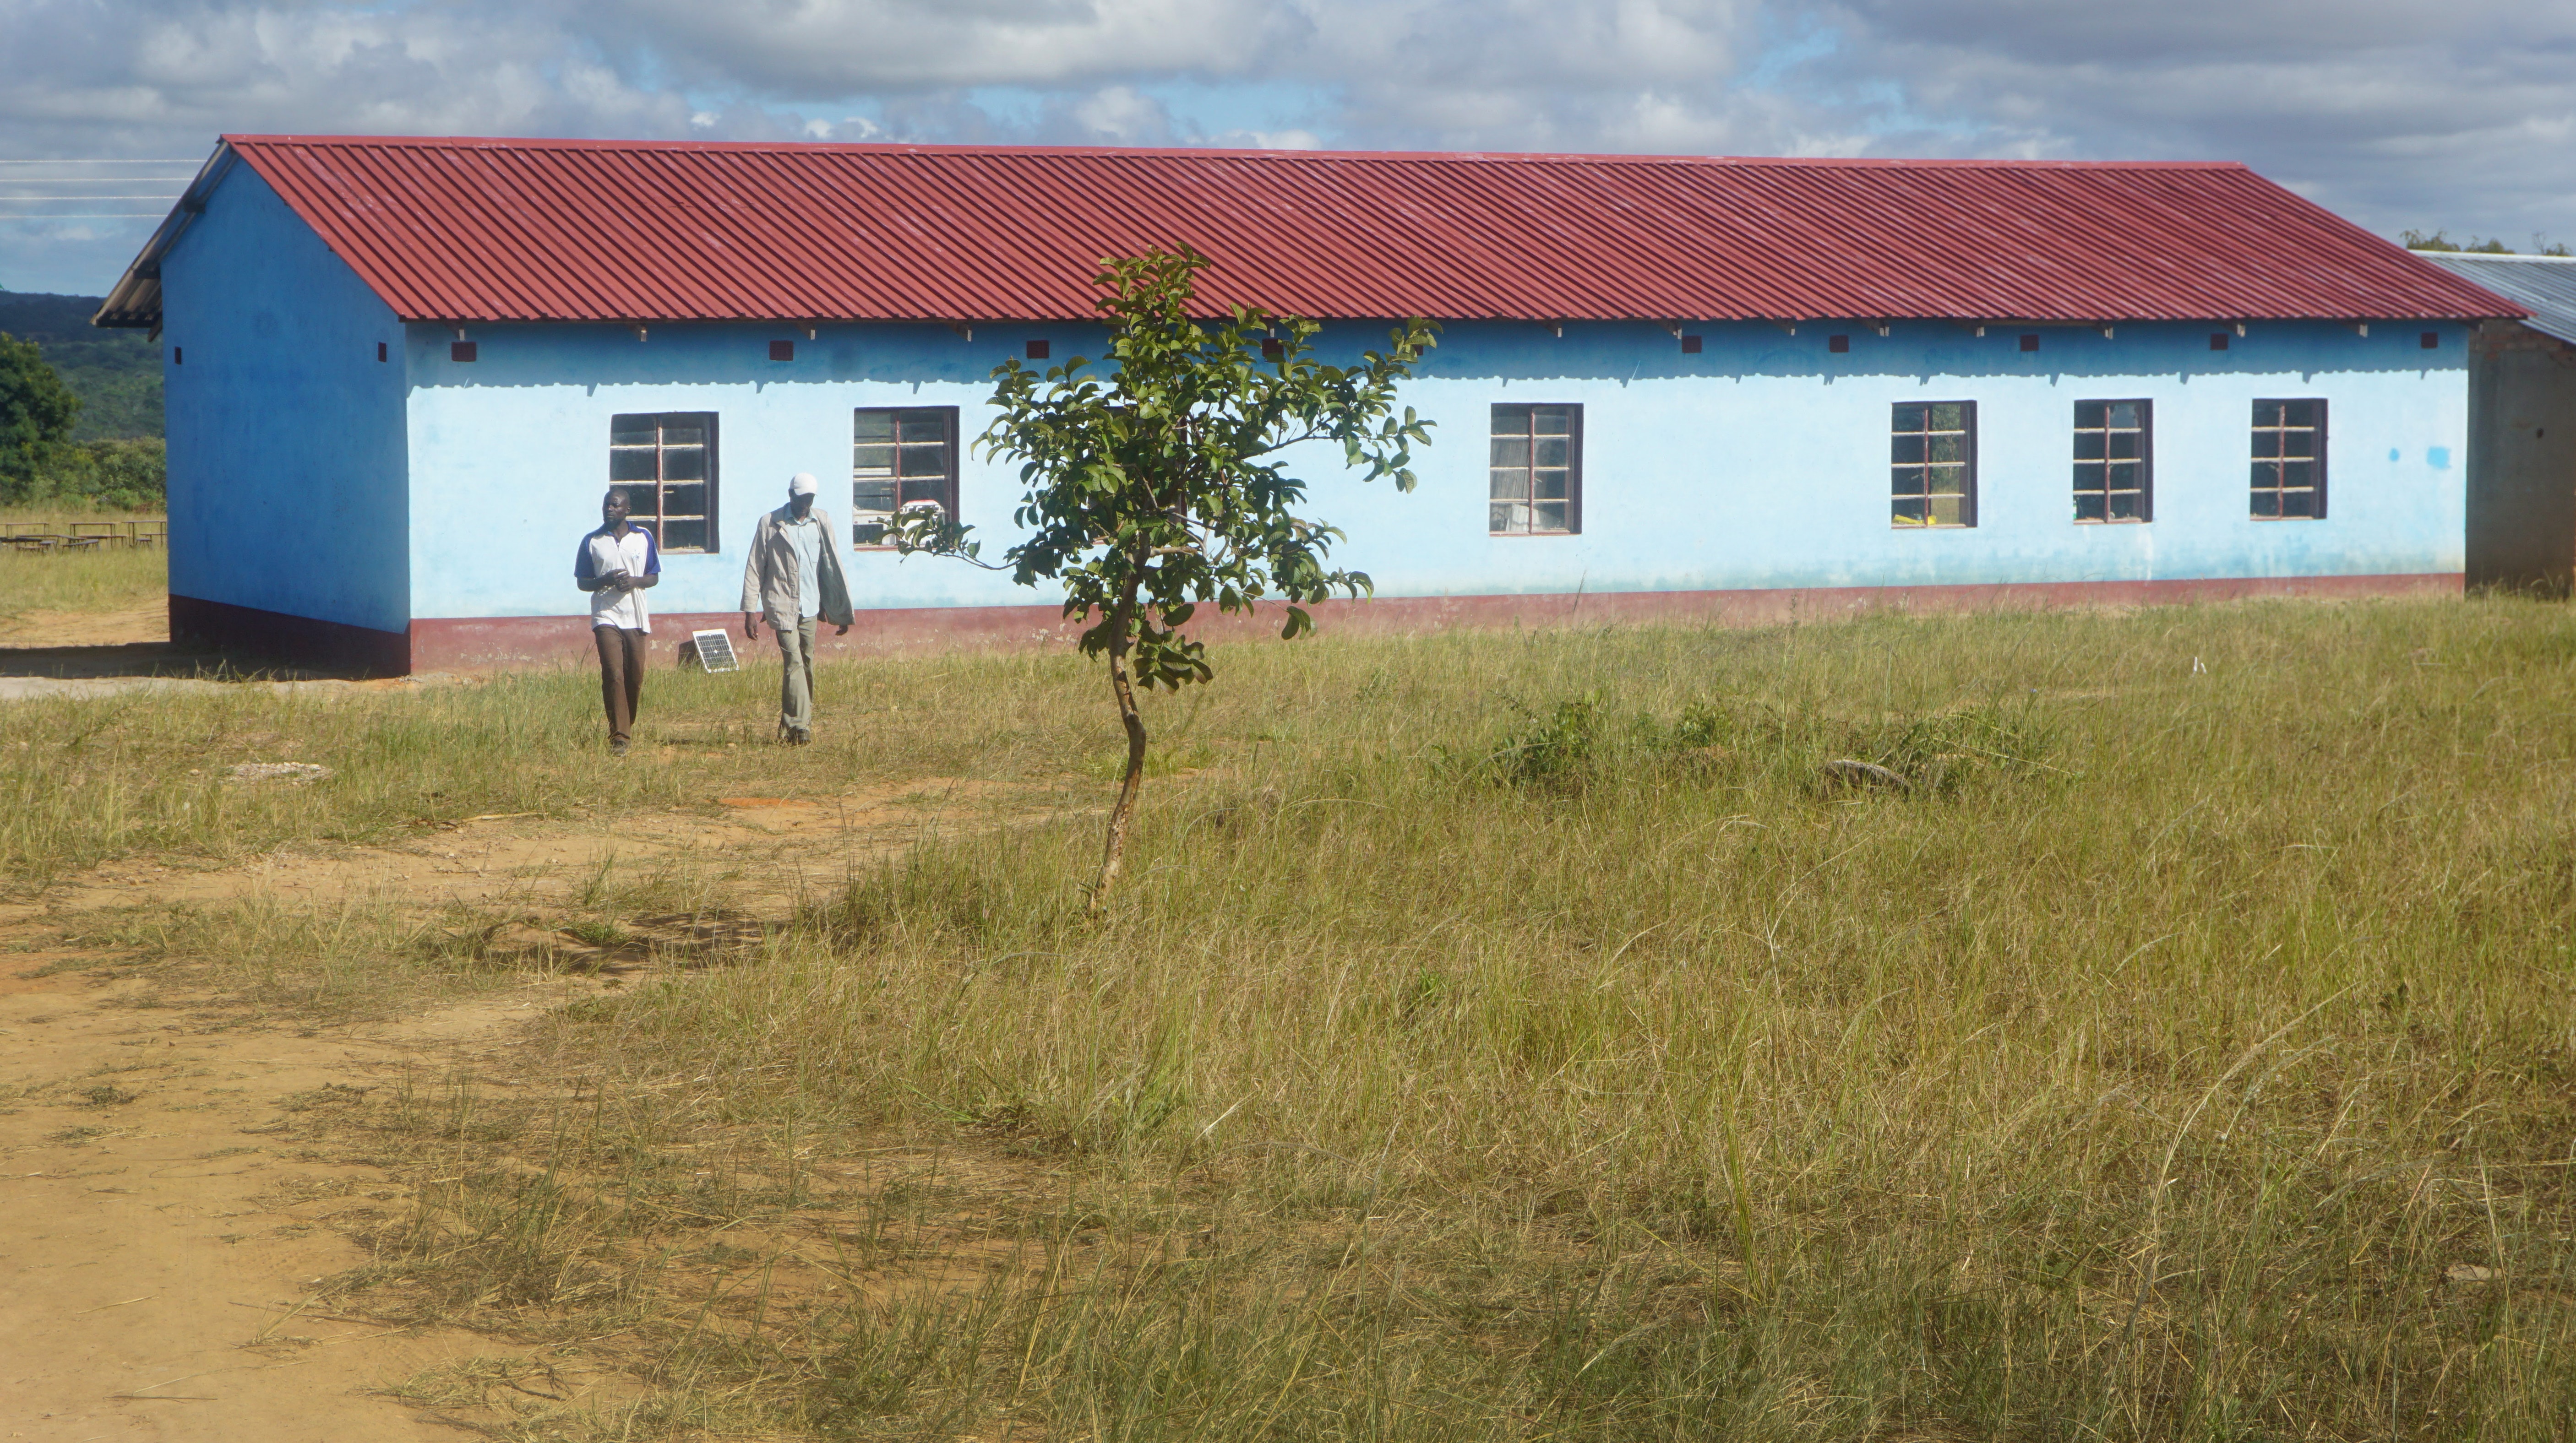 View of new construction at Ngundu Primary School in Buhera, Zimbabwe.  The school, which was on the verge of closing, now has five new classrooms, teachers’ quarters and offices. Photo by Kudzai Chingwe, UMNS.